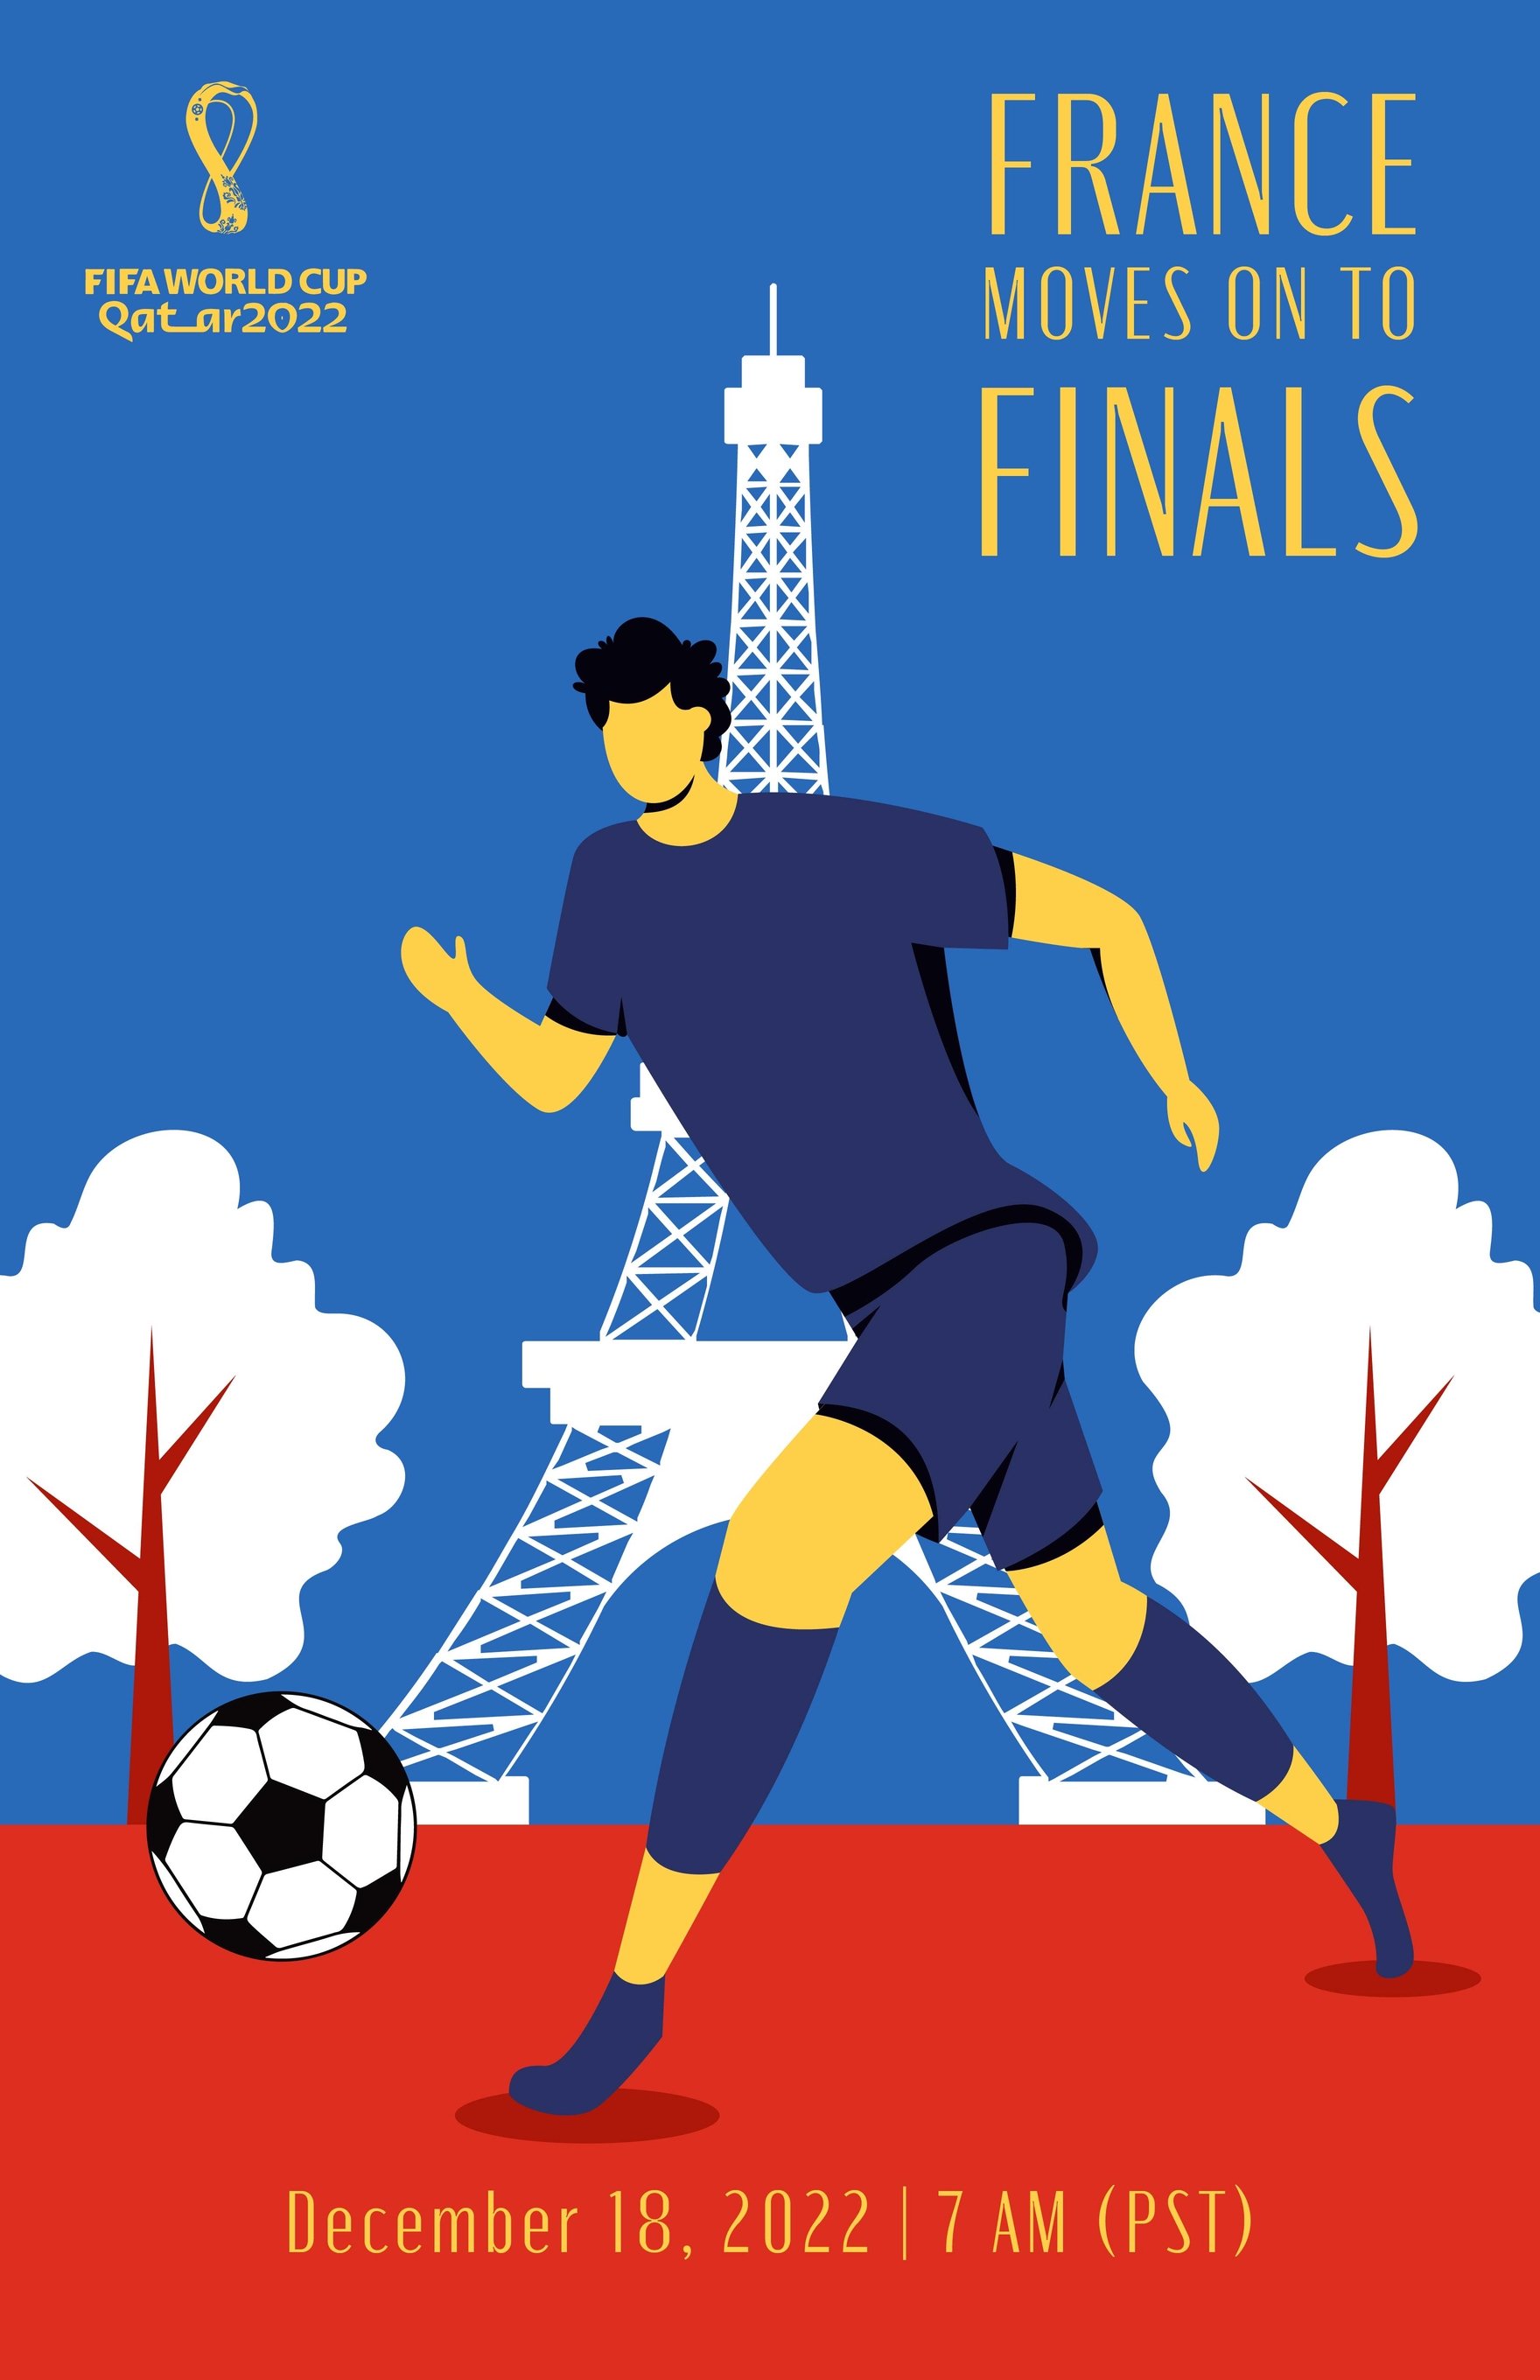 FIFA World Cup 2022 France Finals Poster